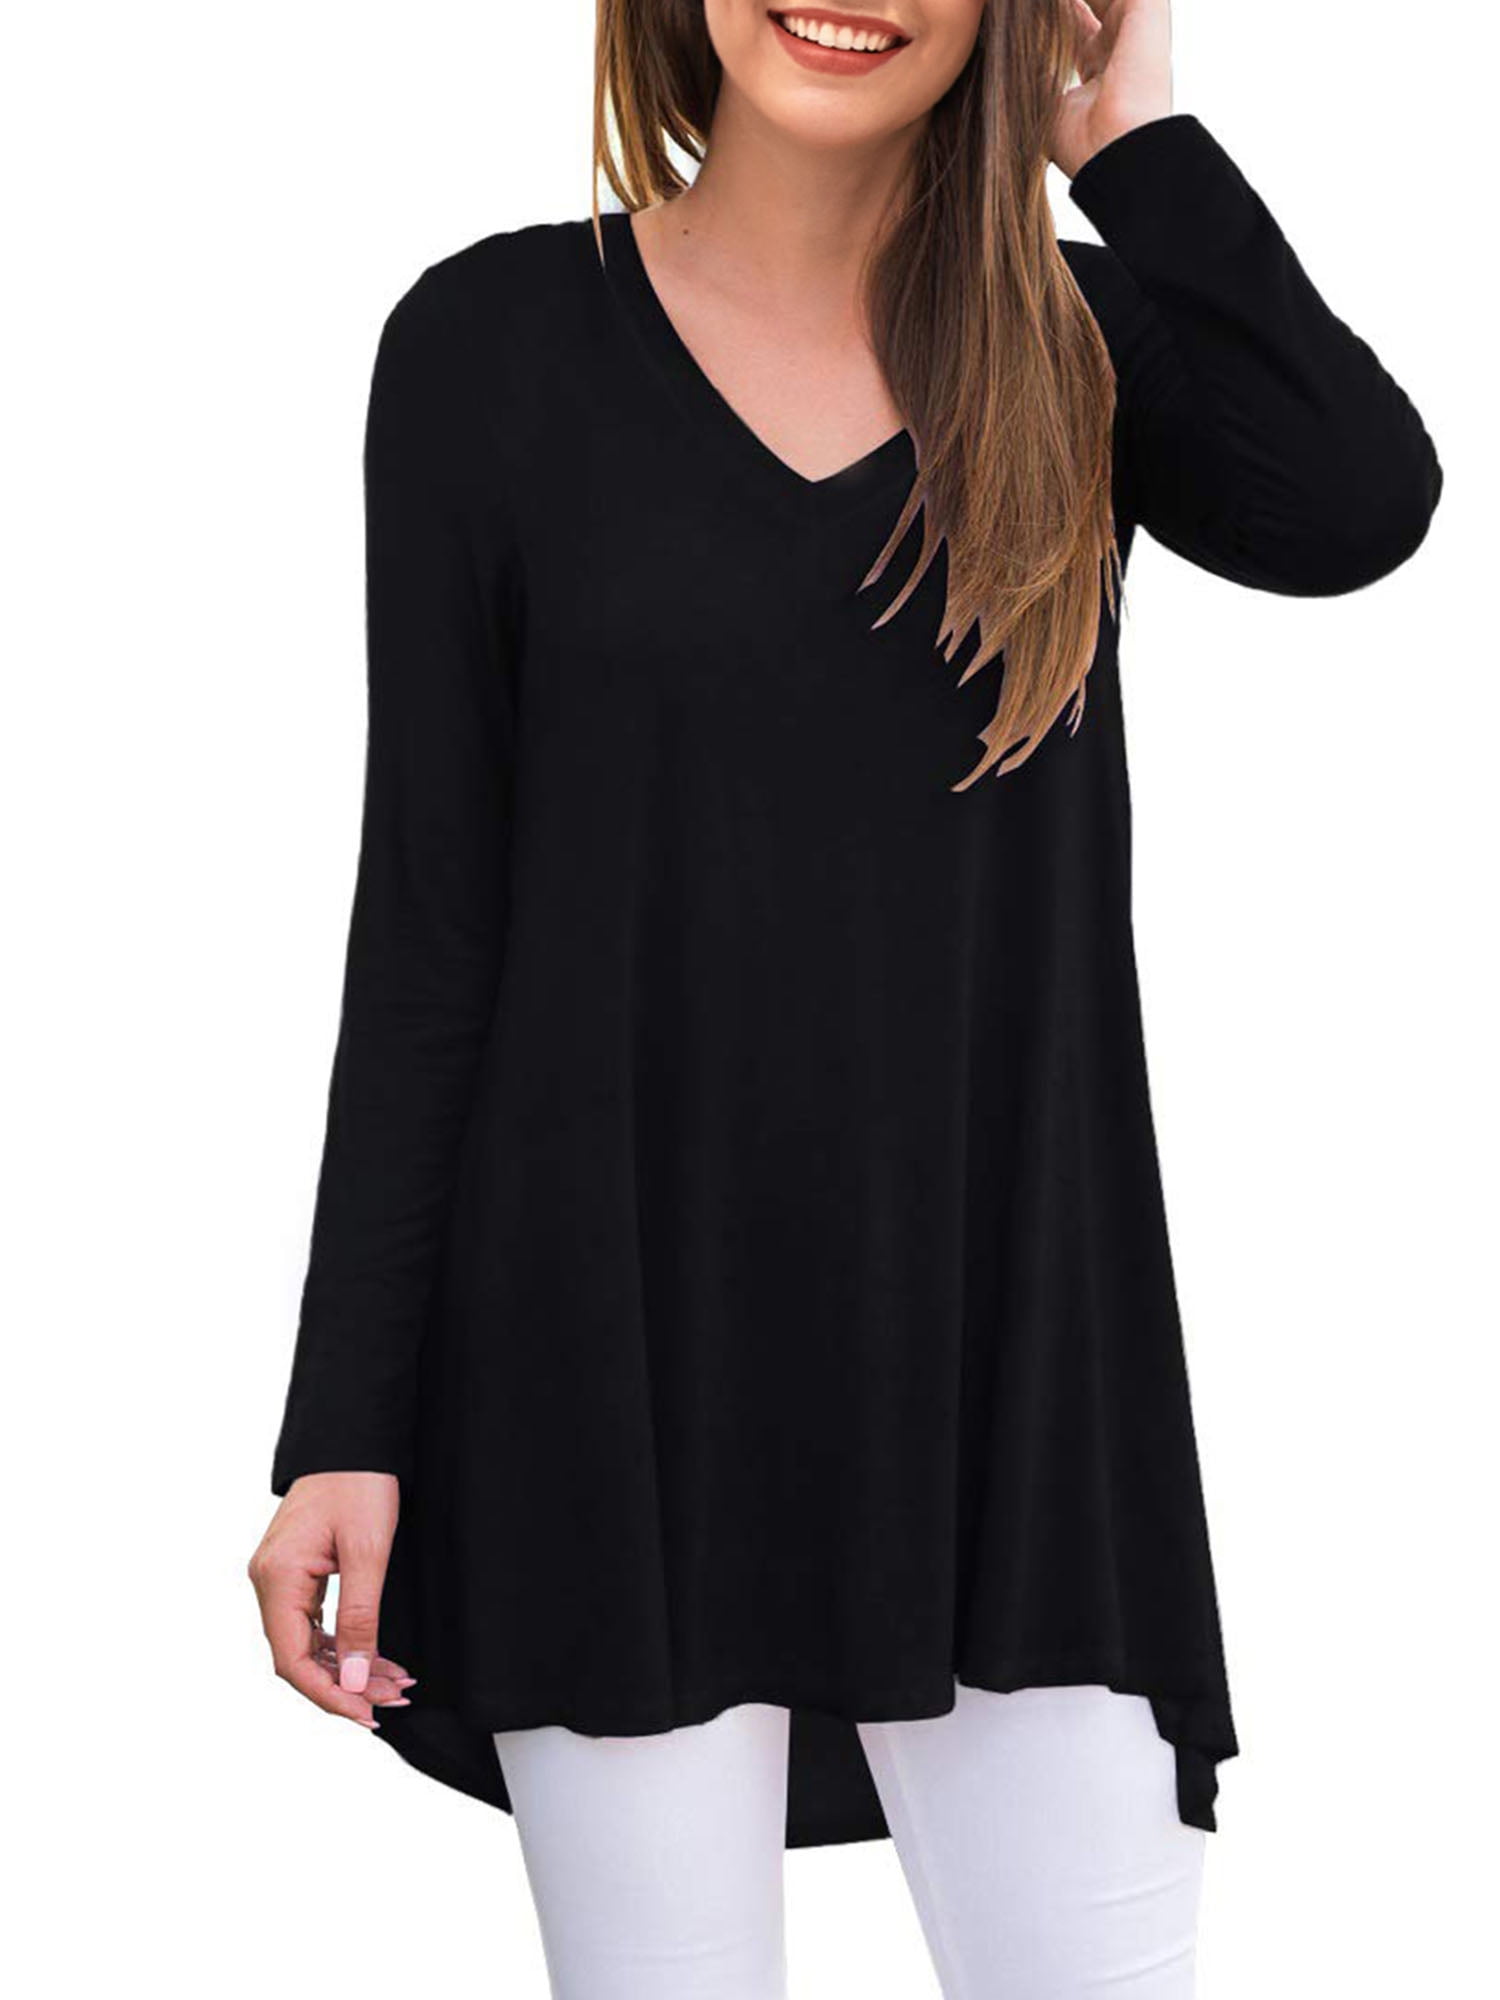 Anygrew Women's Long Sleeve V Neck Shirts Casual Tunic Tops Blouse ...